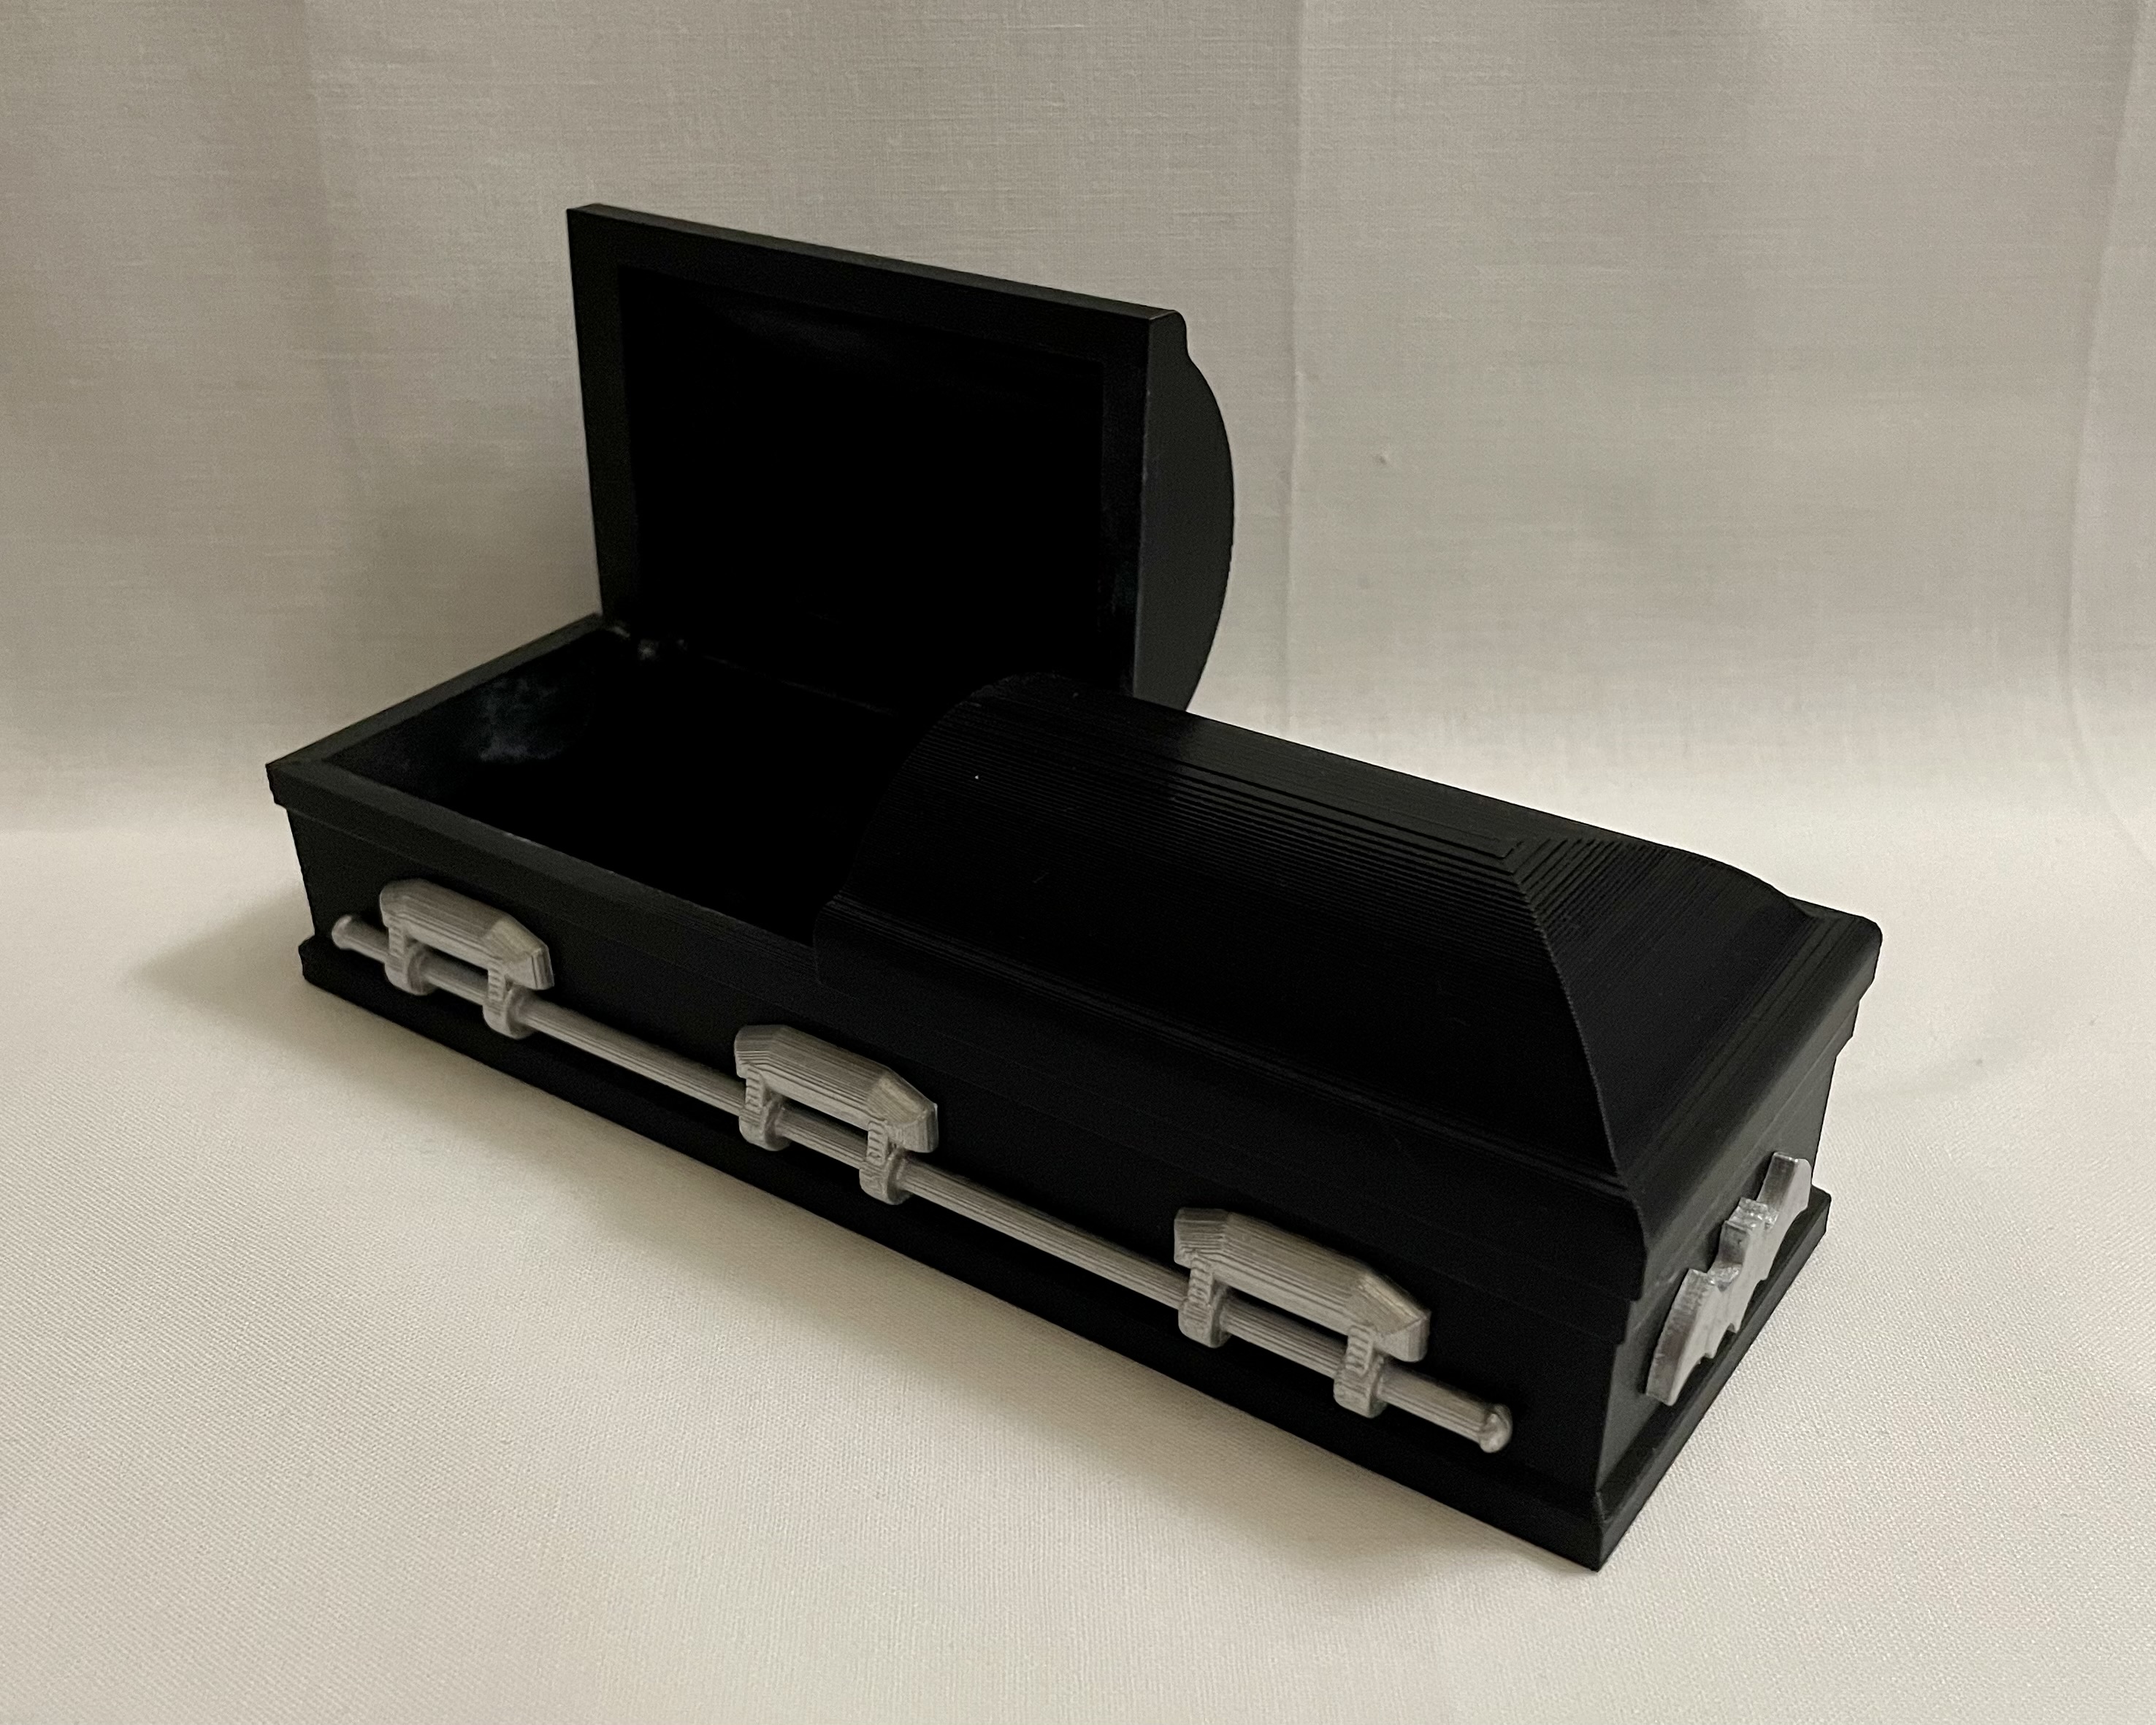 Burial Casket - 1:12 Scale Dollhouse Size by Crazy4Lookin | Download ...